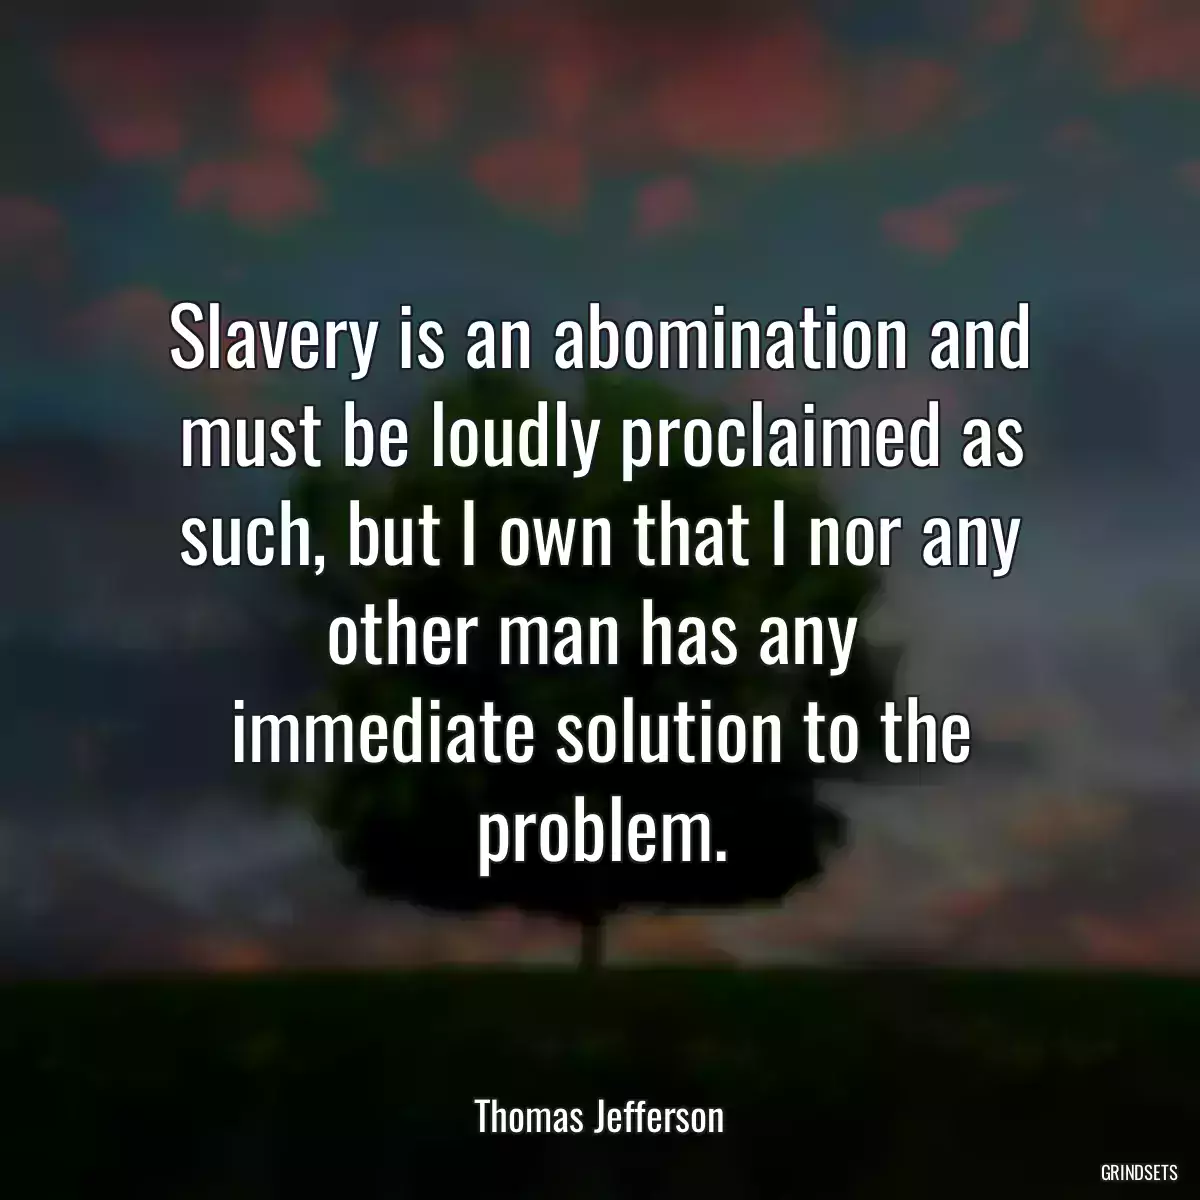 Slavery is an abomination and must be loudly proclaimed as such, but I own that I nor any other man has any 
immediate solution to the problem.